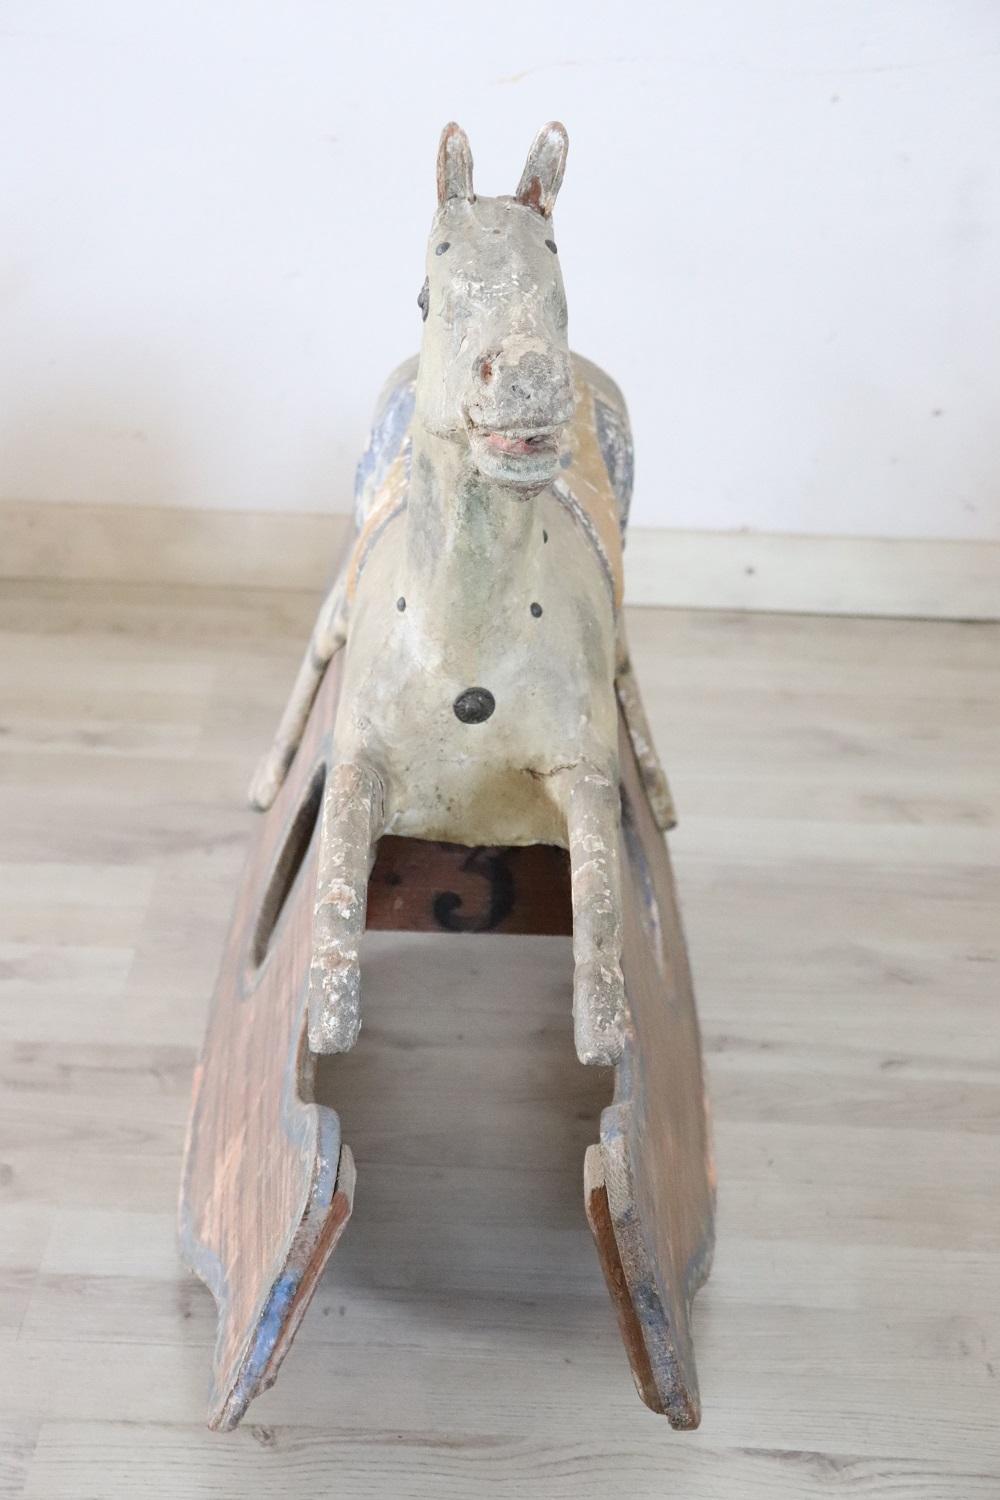 Beautiful antique rocking horse made in Italy at the end of the 19th century. The horse is made of wood and the body is covered in papier-mâché. Completely hand painted. Signs of wear missing tail and bridle. A collectible toy.